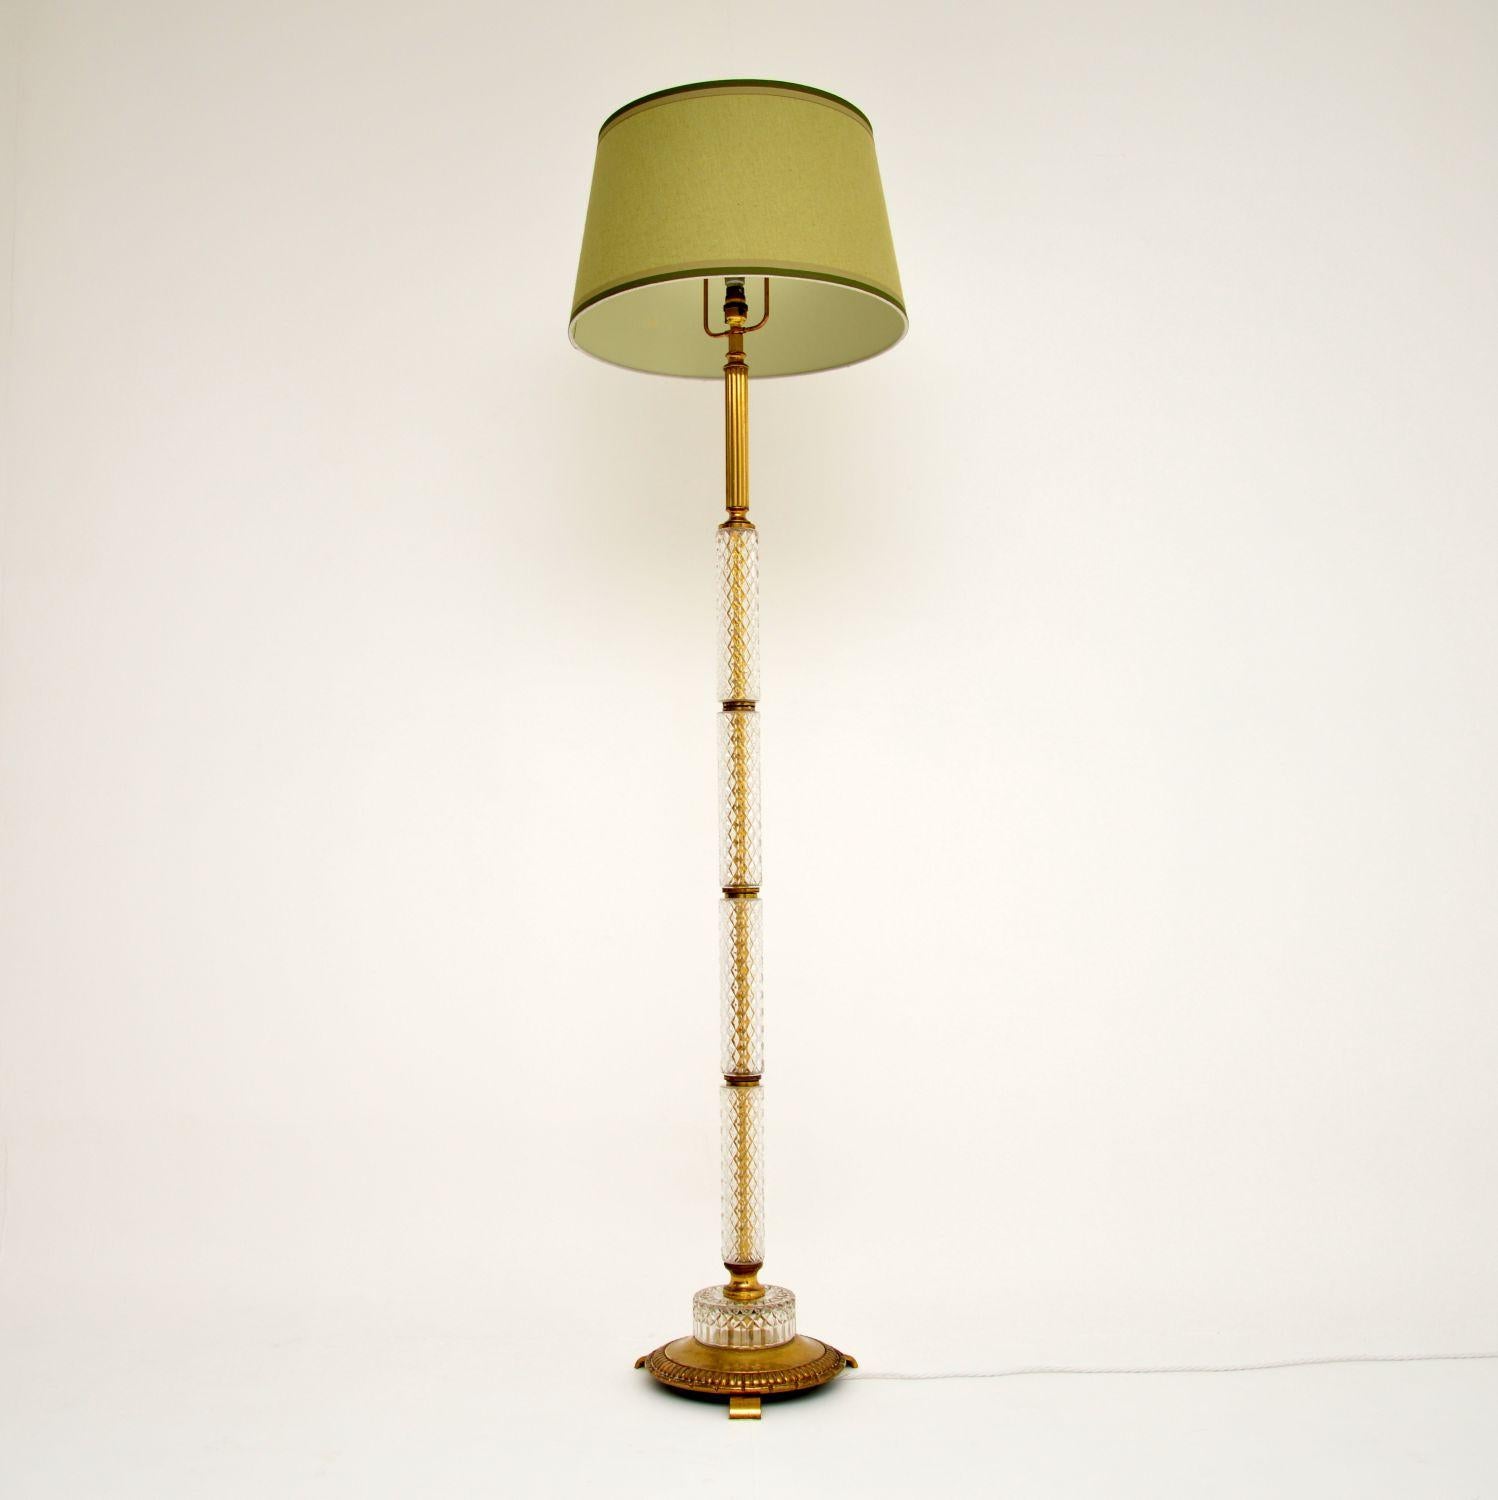 Antique neoclassical crystal glass and brass floor lamp in excellent condition and dating to circa 1950s period.

This standard lamp has just been rewired and has a nice shade to match it. The stand has quite a few separate segments of crystal cut